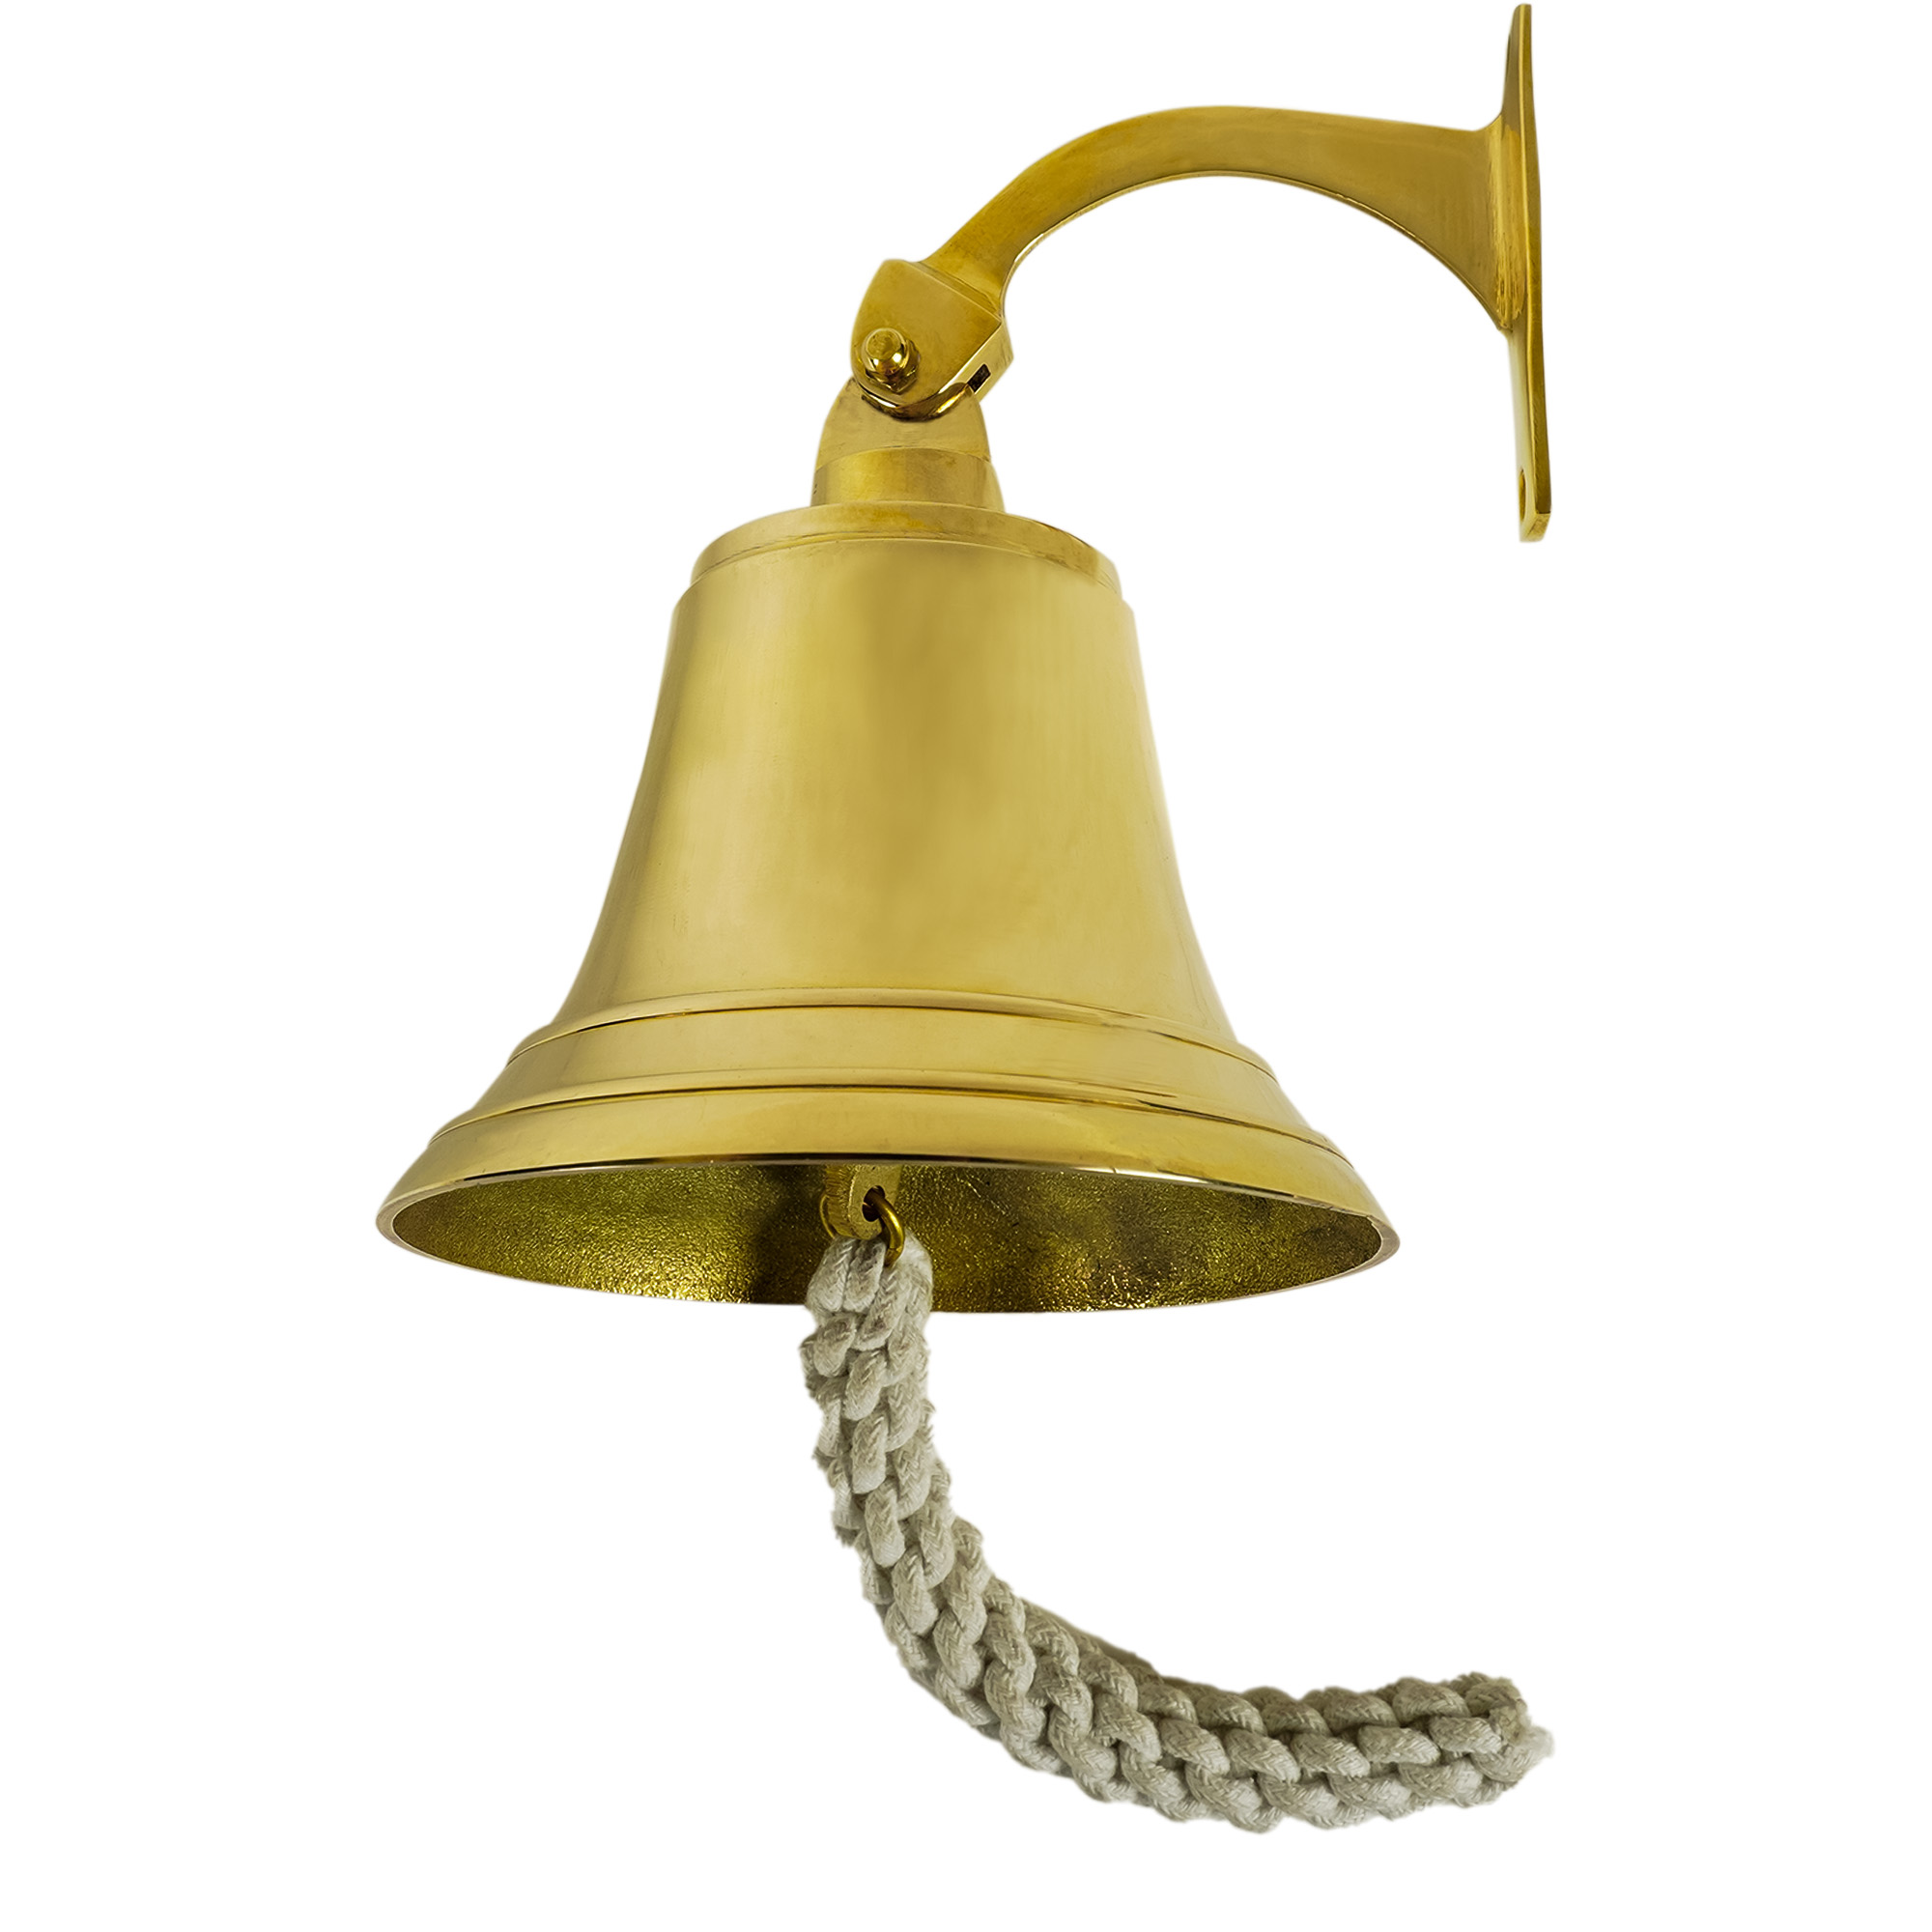 Brass Hanging Bell Solid Bell with Deep Sound Antique Style Home